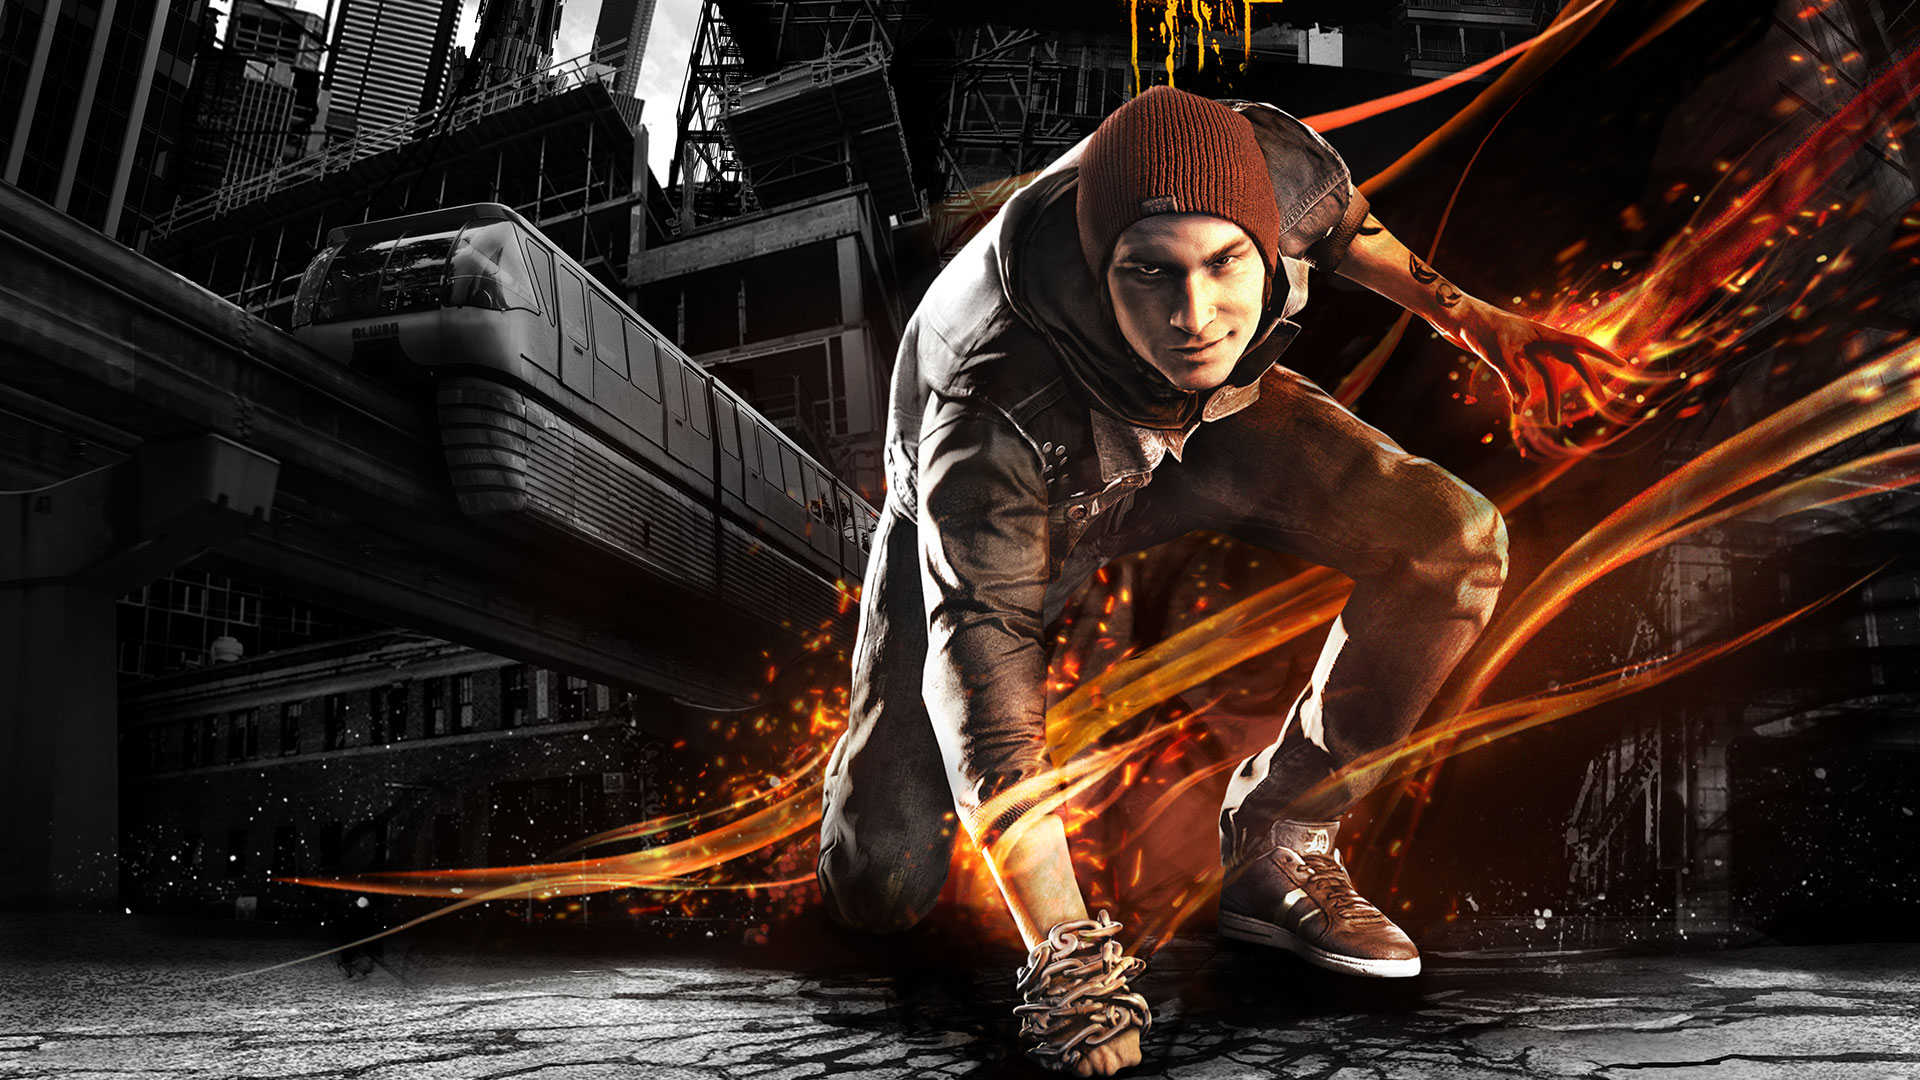 infamous second son free download